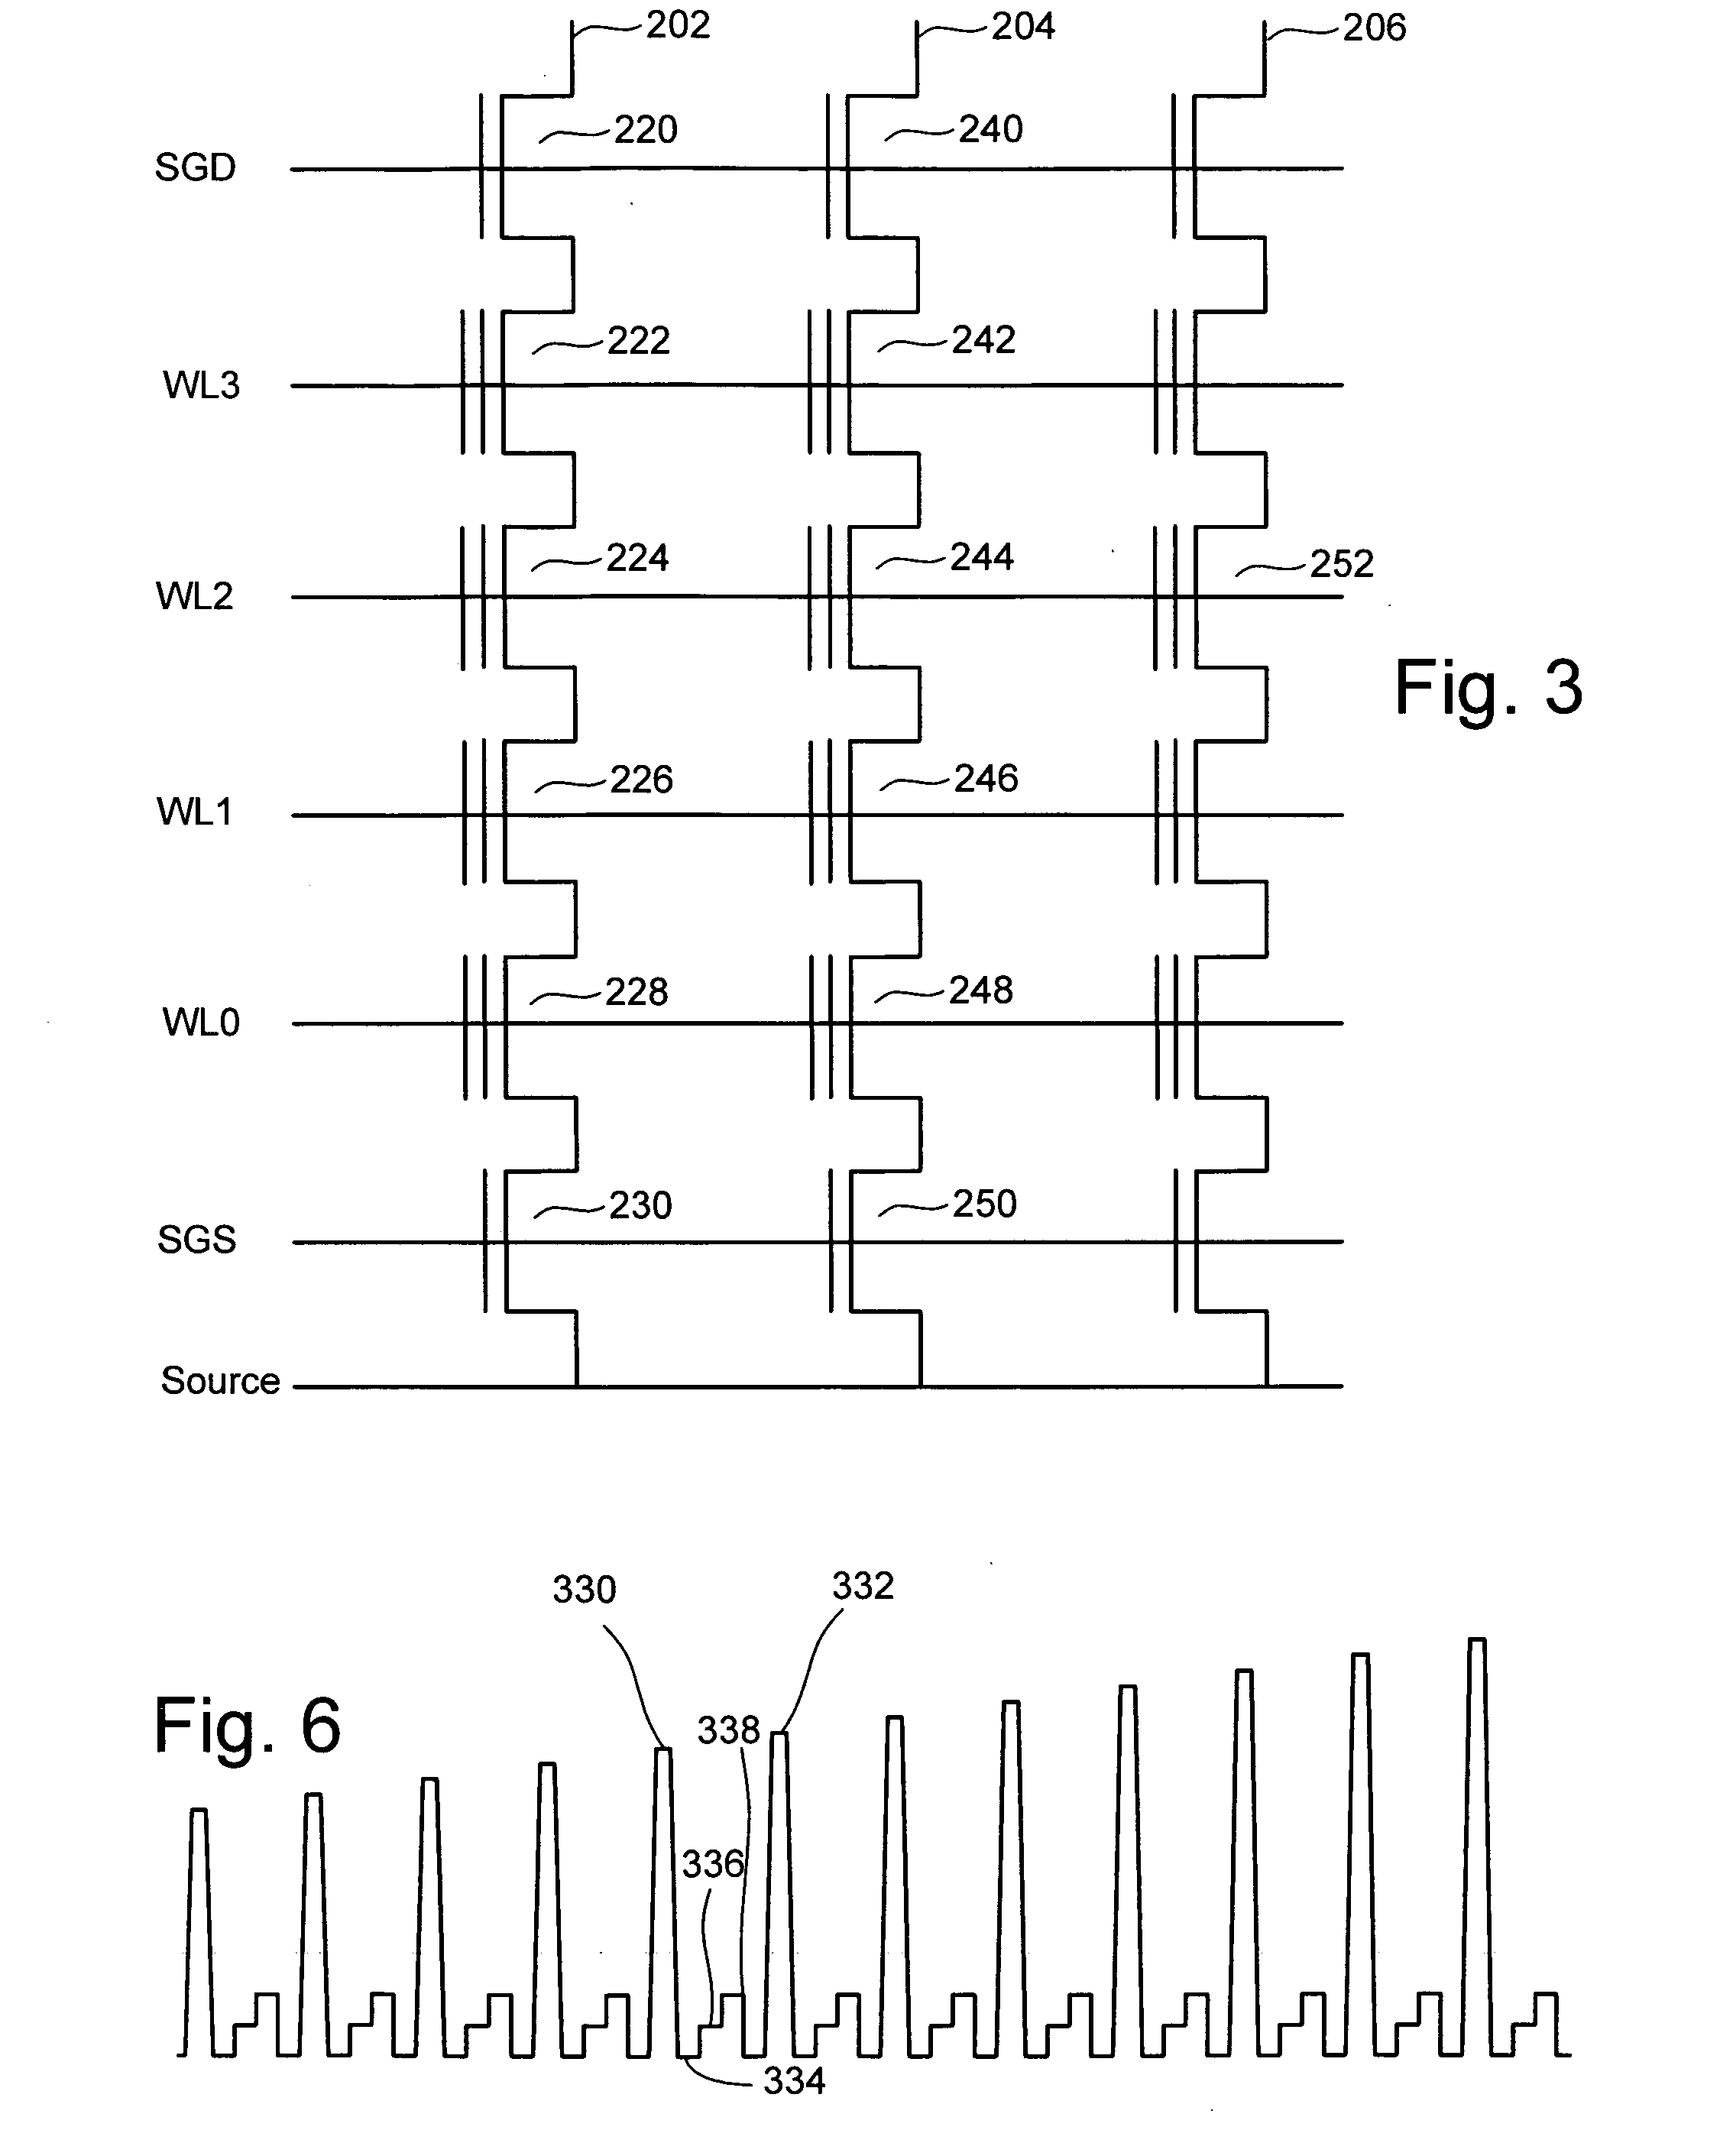 Erasing non-volatile memory using individual verification and additional erasing of subsets of memory cells